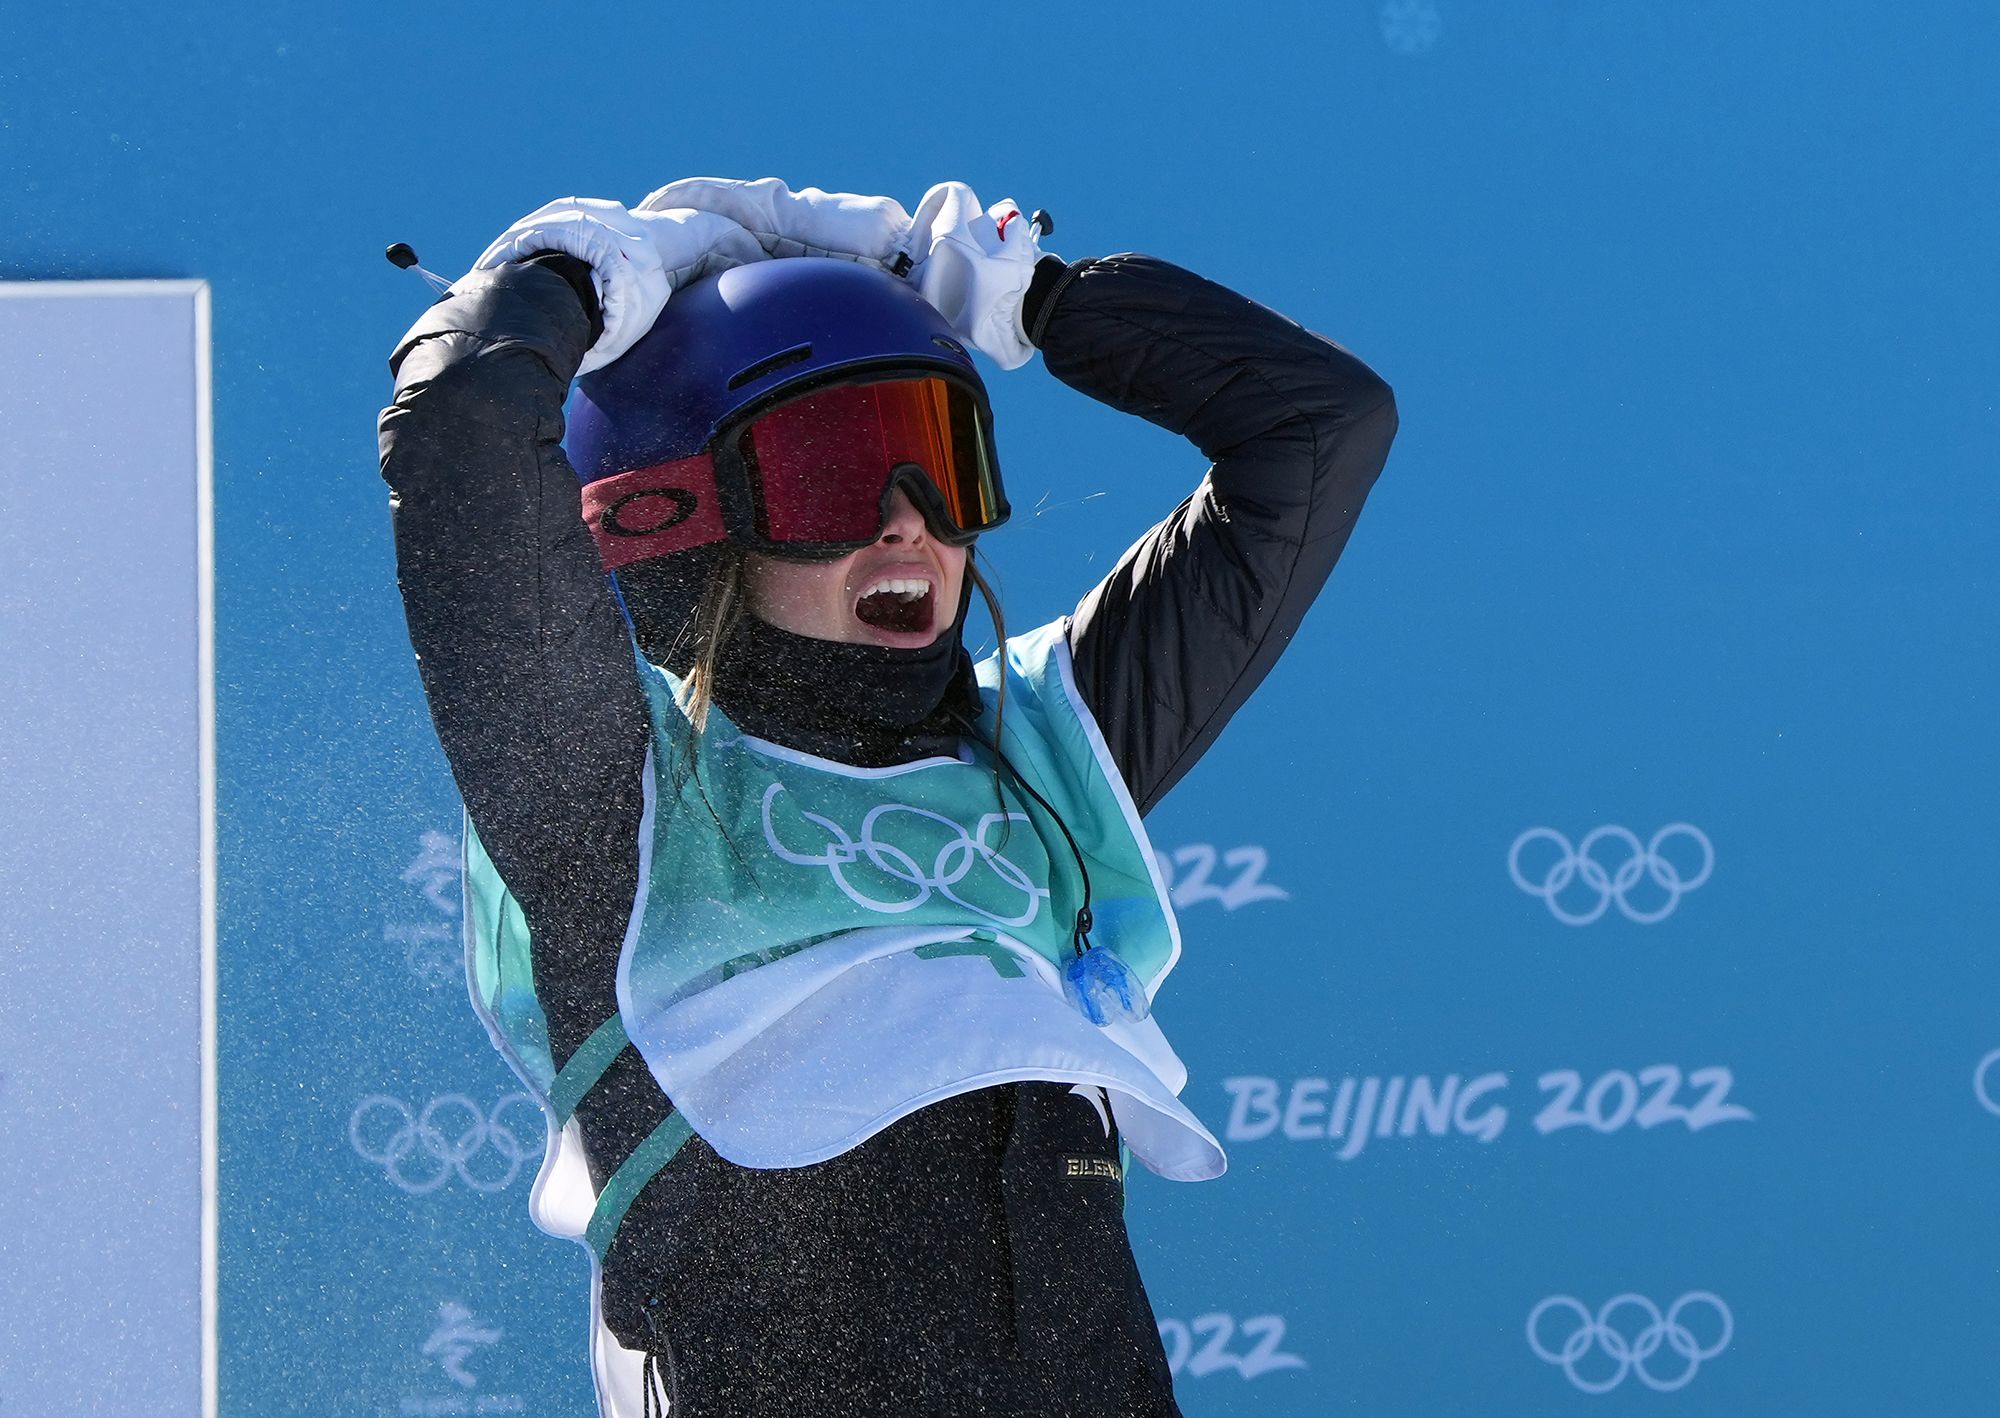 Eileen Gu: Sport and fashion aren't so different for the Chinese-American  skier and model